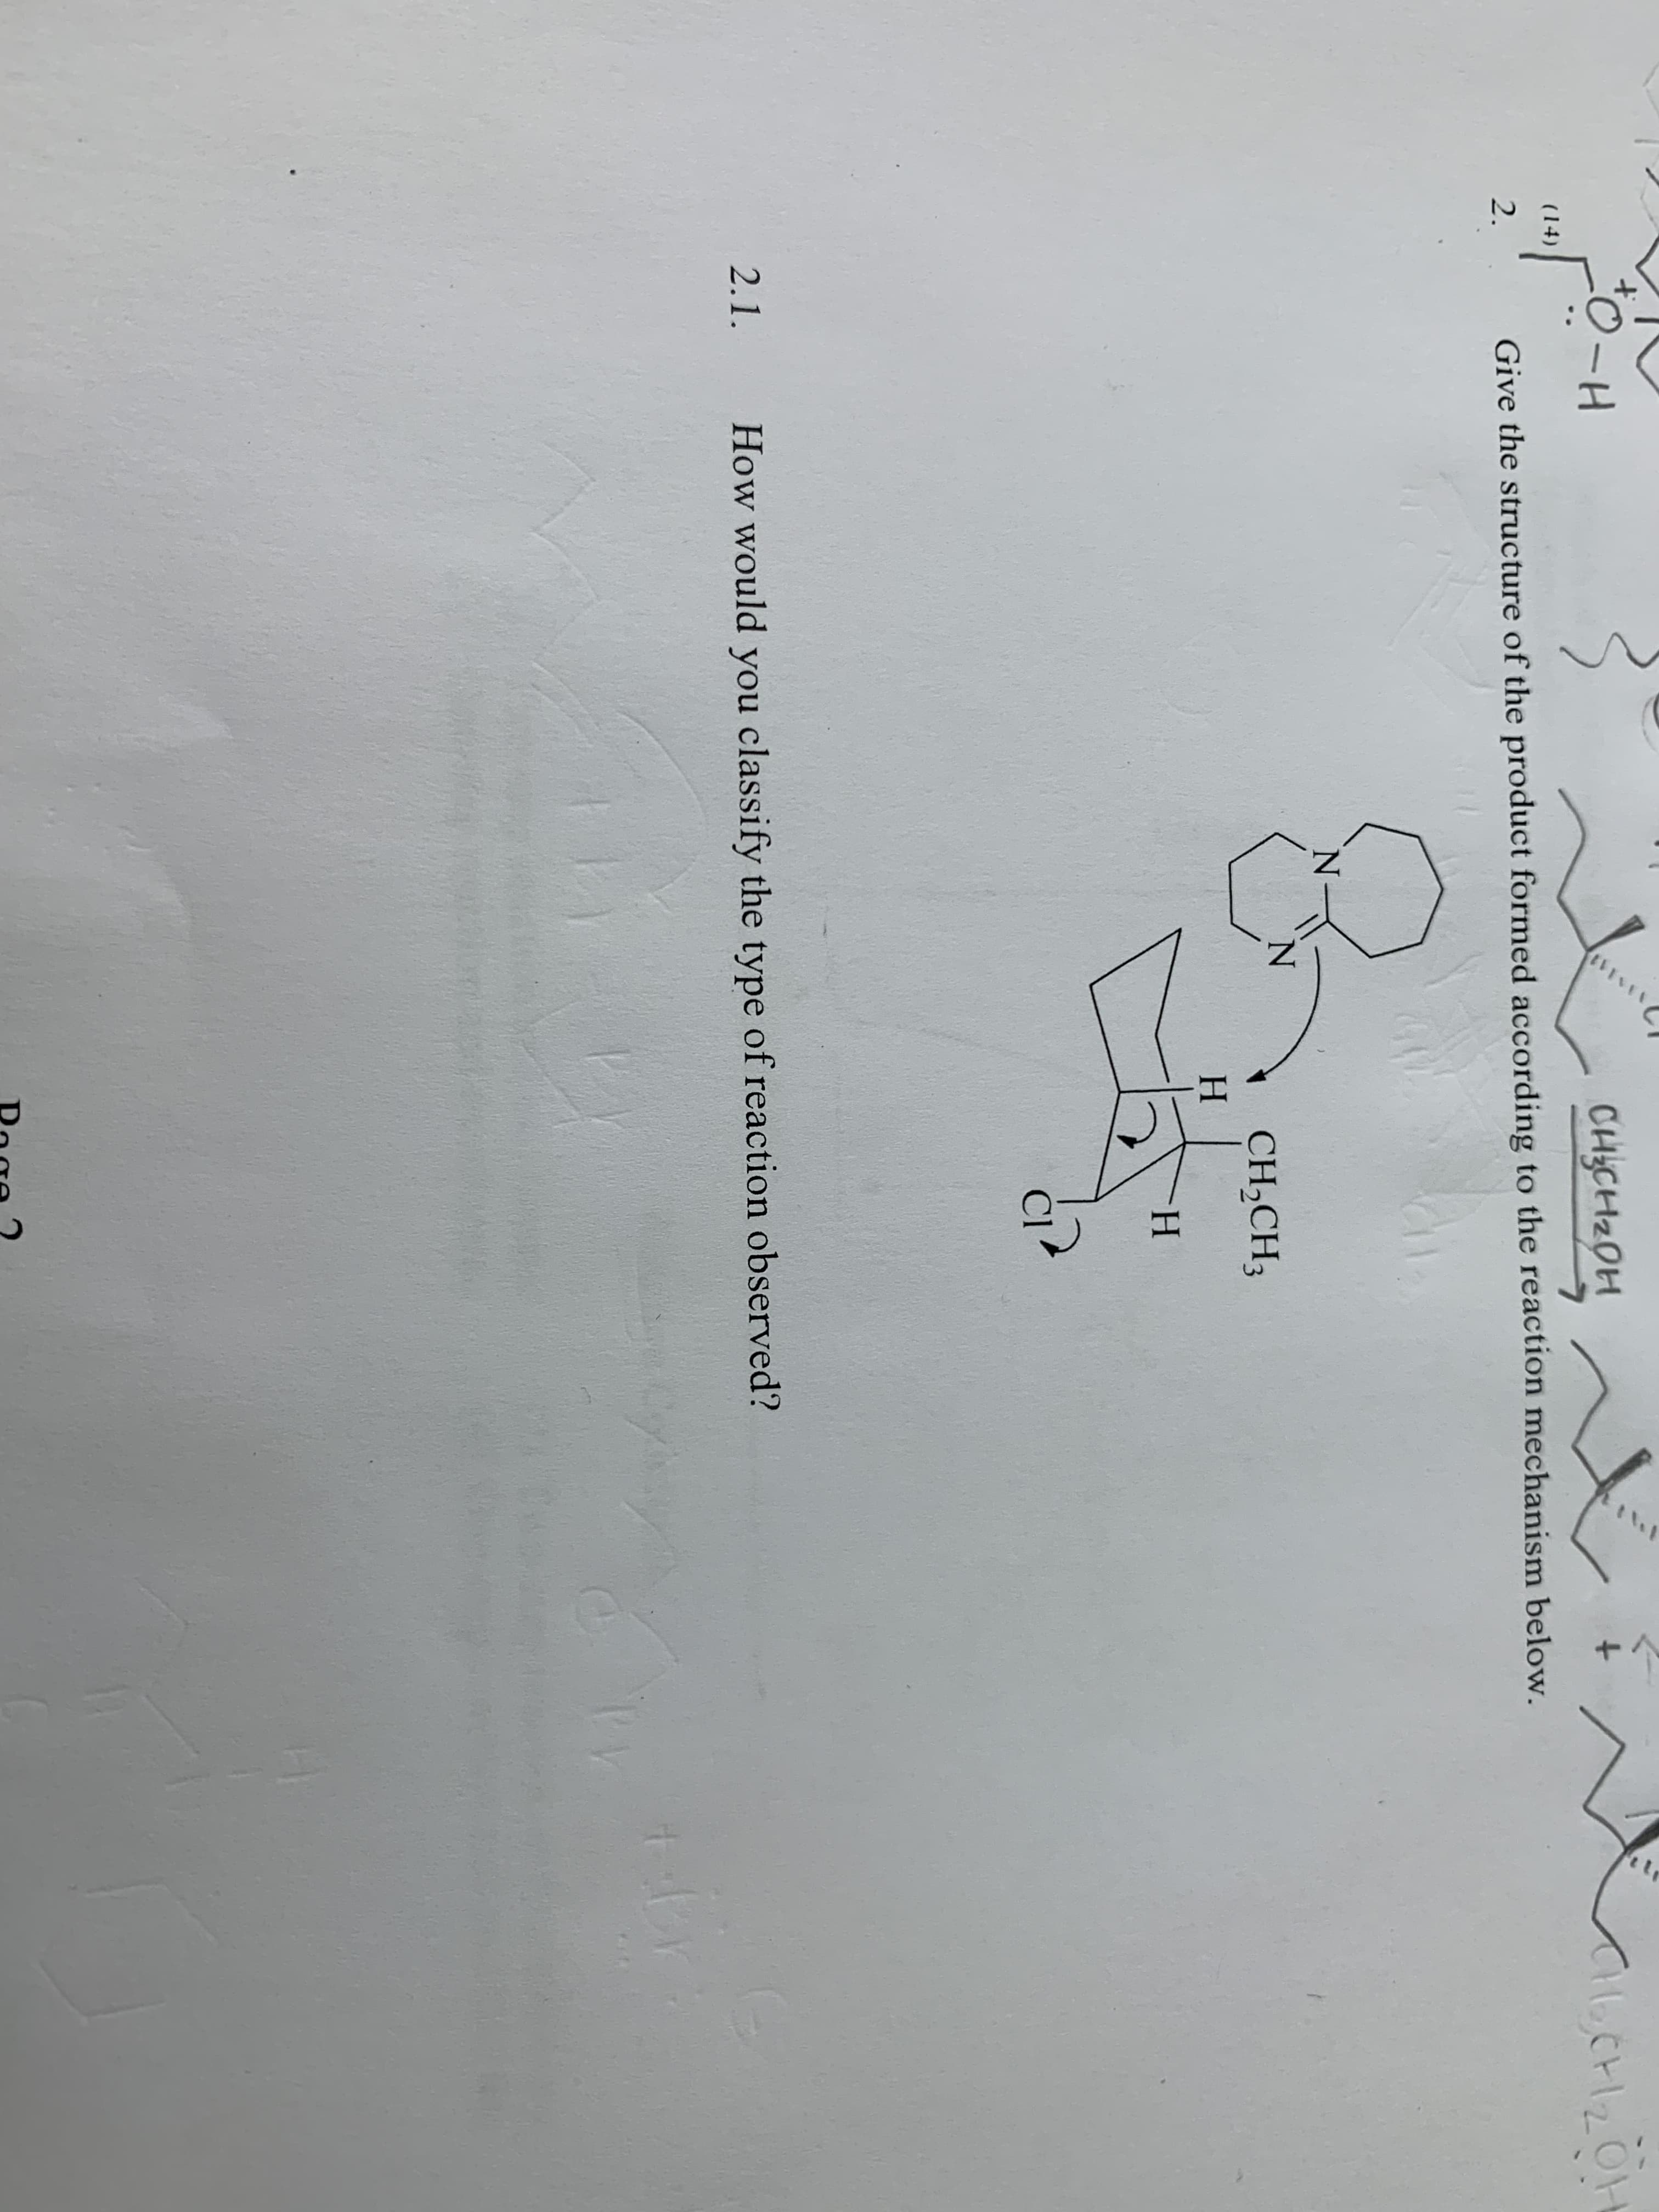 O-H
CHICH20H
(14)
2.
Give the structure of the product formed according to the reaction mechanism below.
CH,CH3
H.
H.
Cl
2.1.
How would you classify the type of reaction observed?
Roge ?
